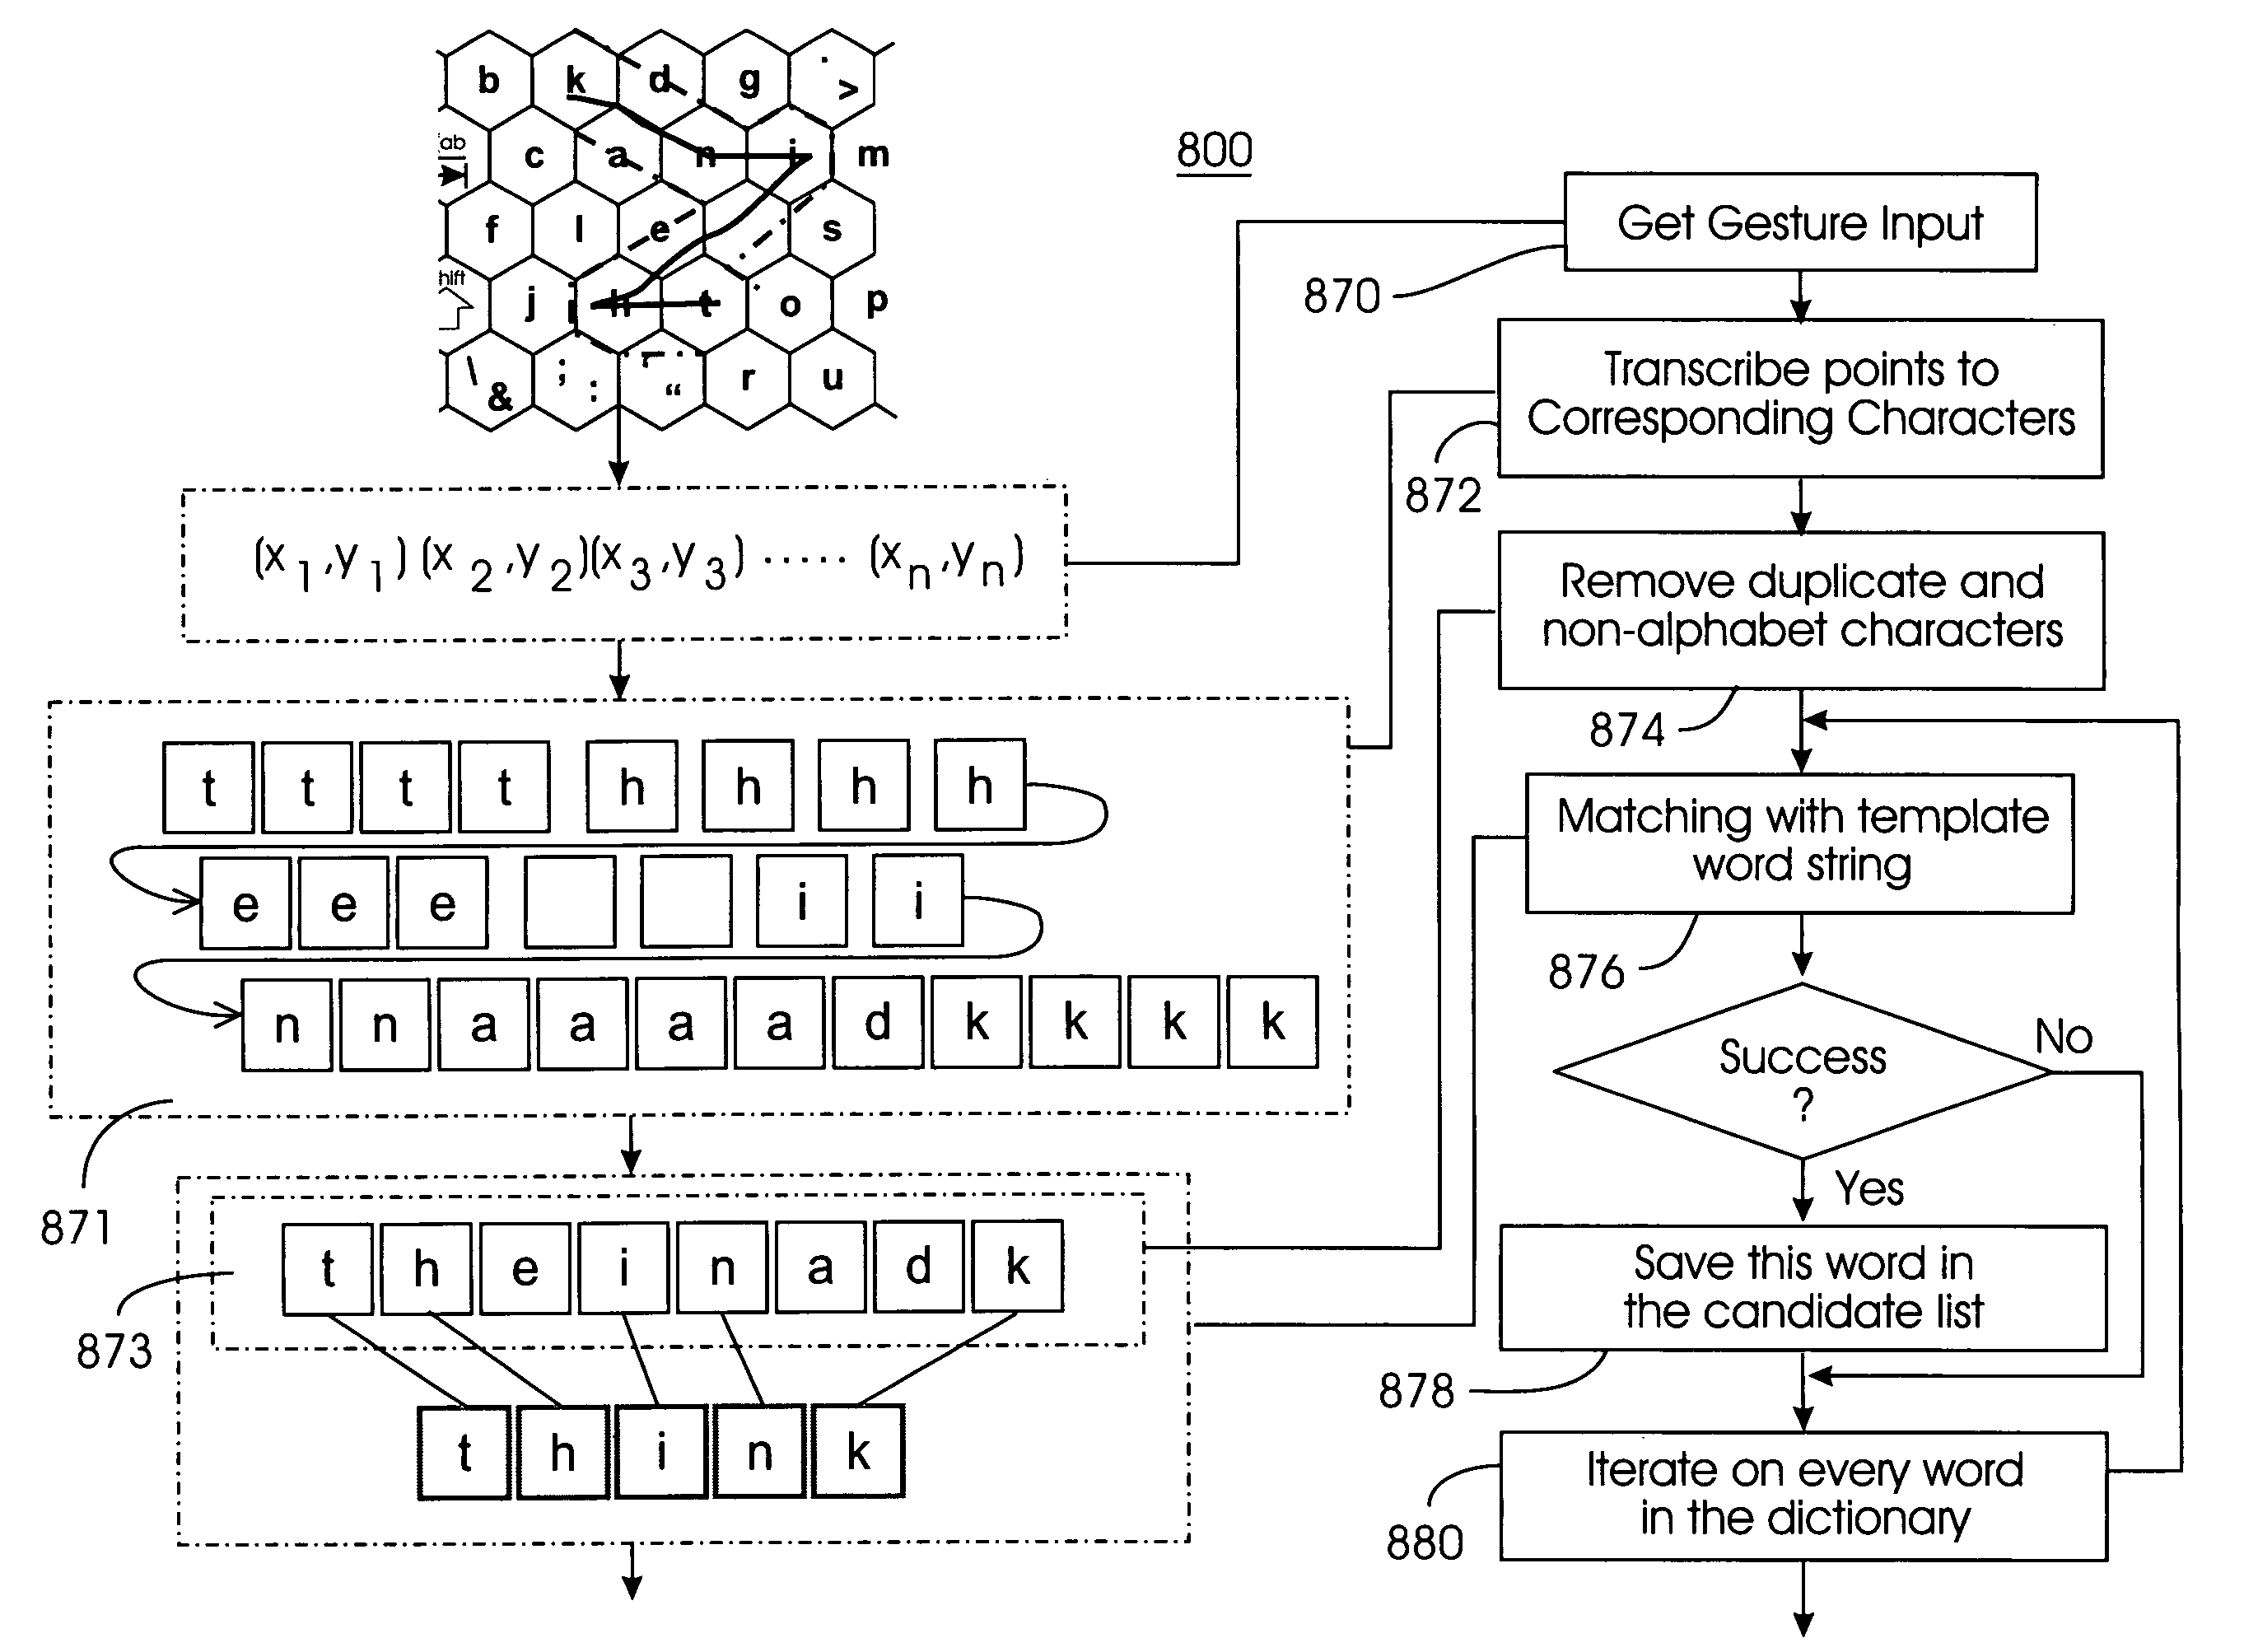 System and method for recognizing word patterns in a very large vocabulary based on a virtual keyboard layout